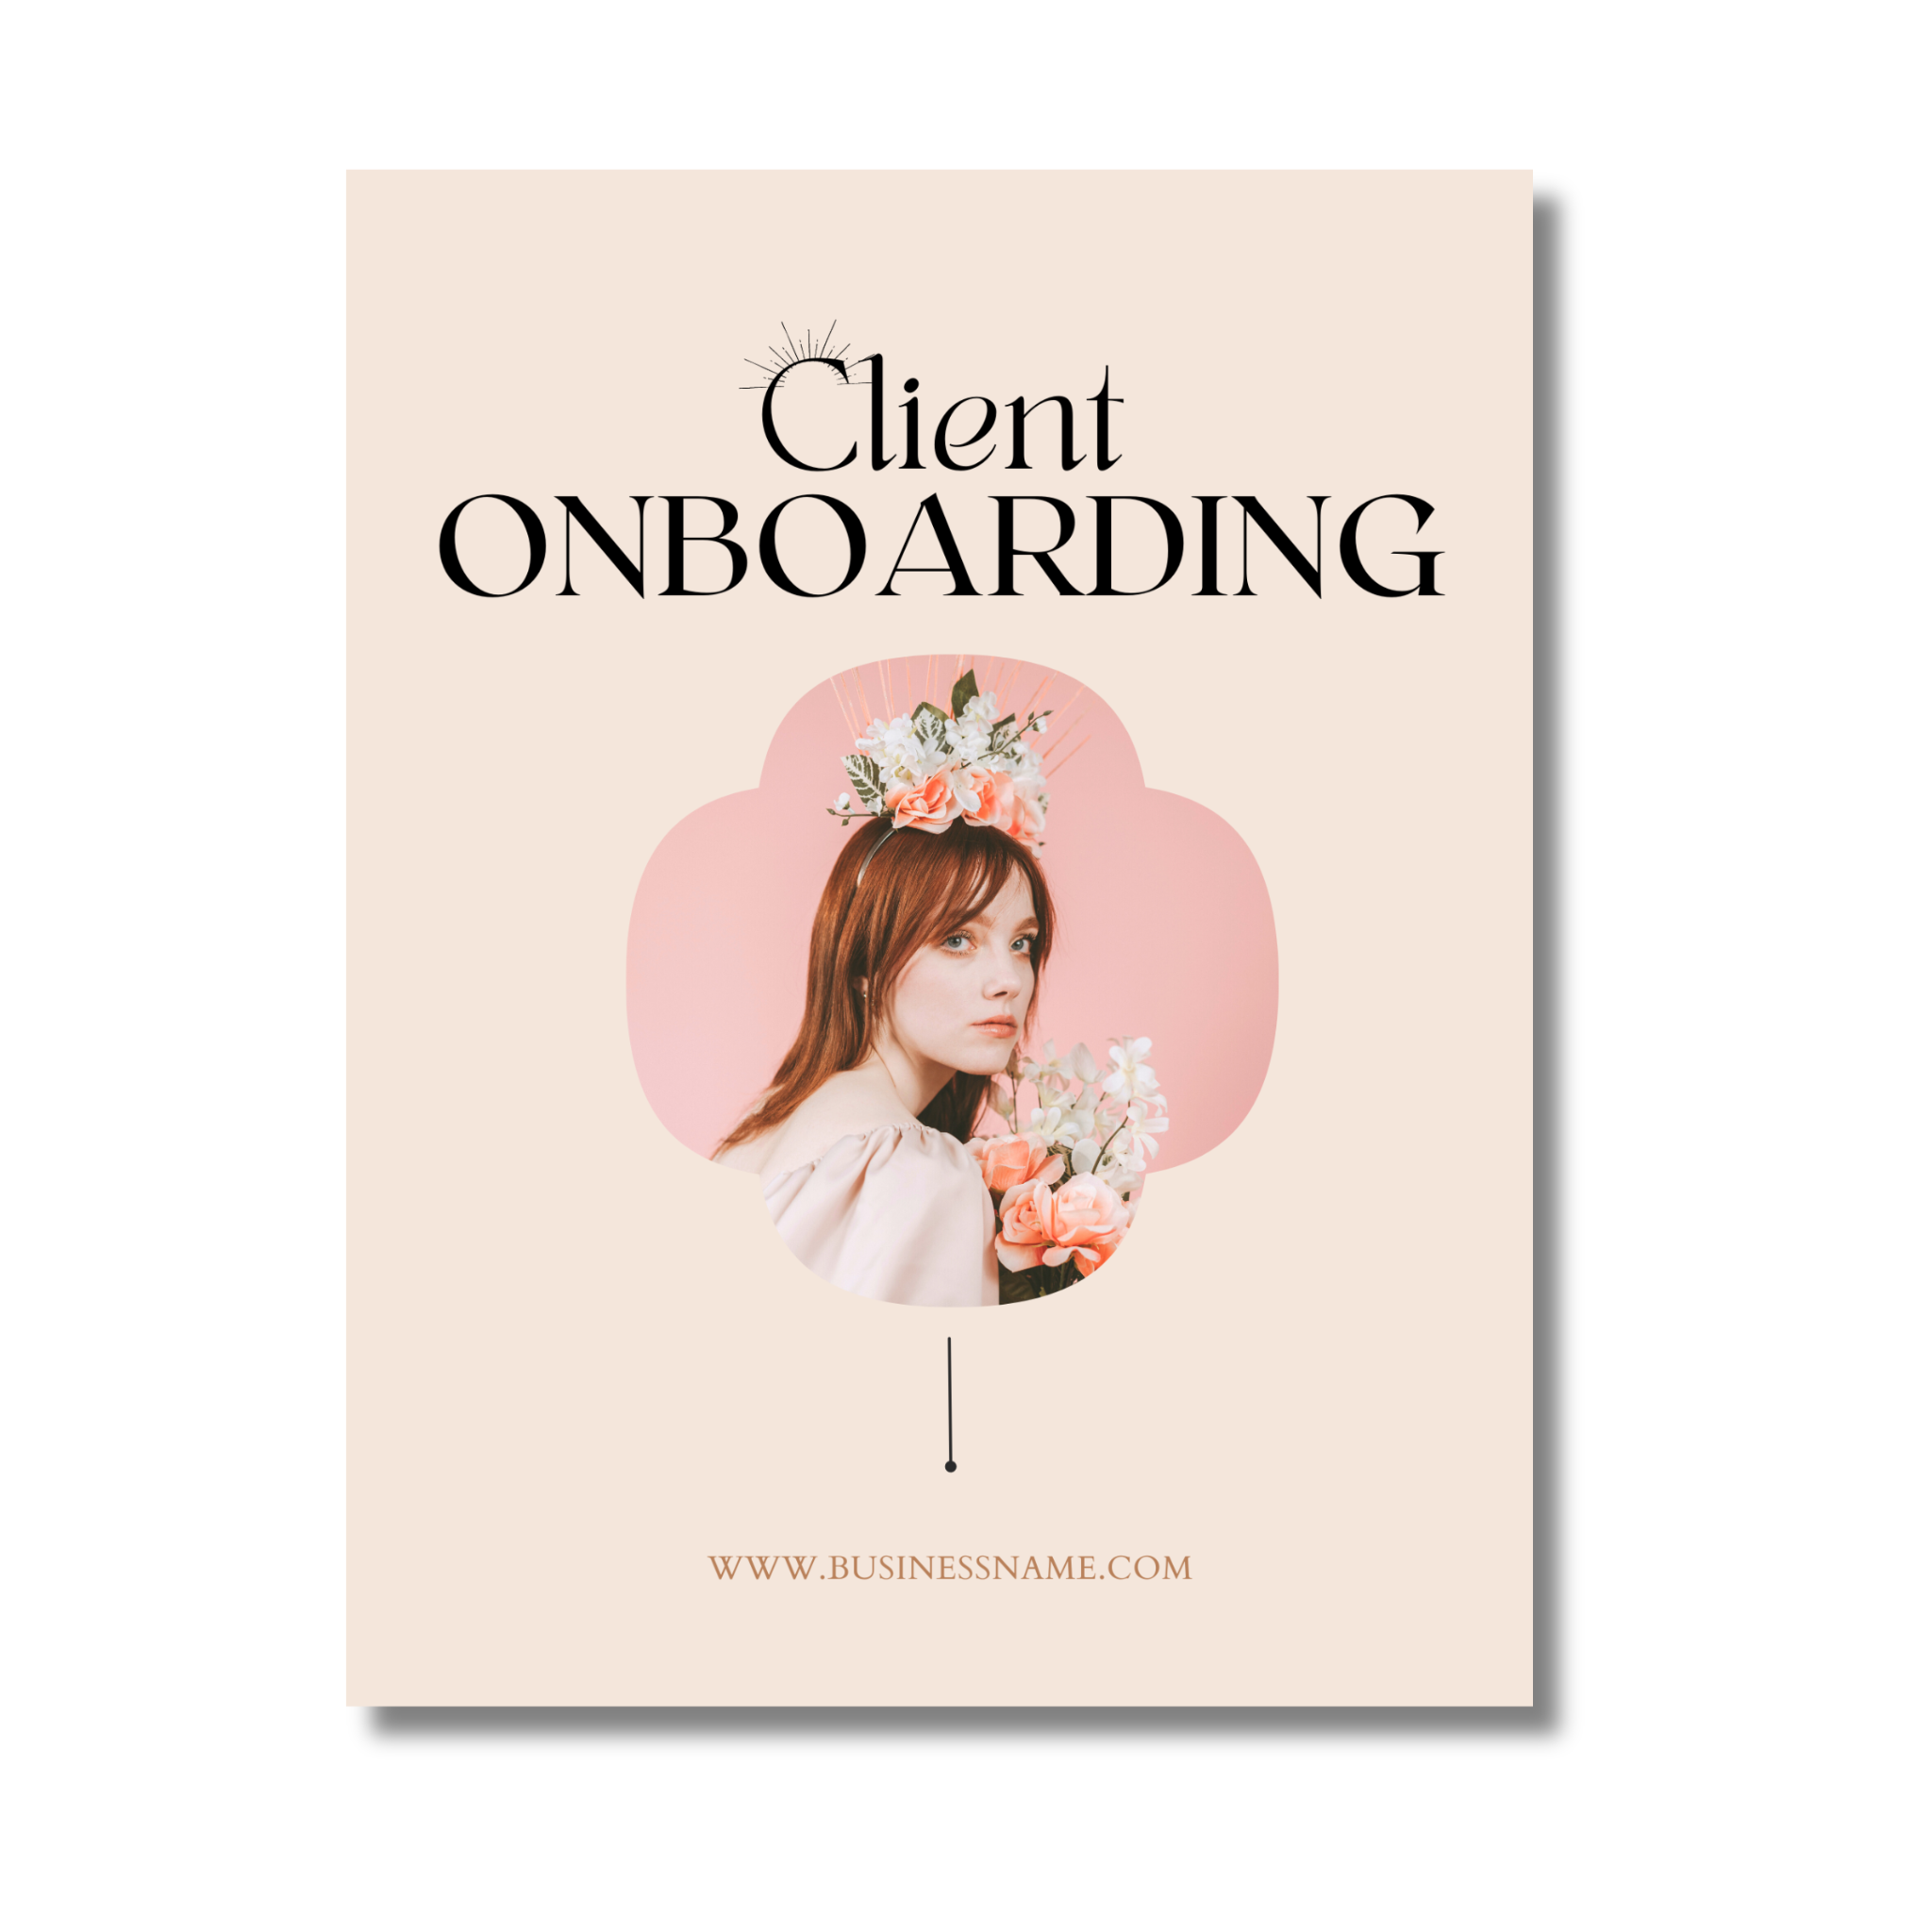 Client Onboarding Template - Delicate & Dreamy